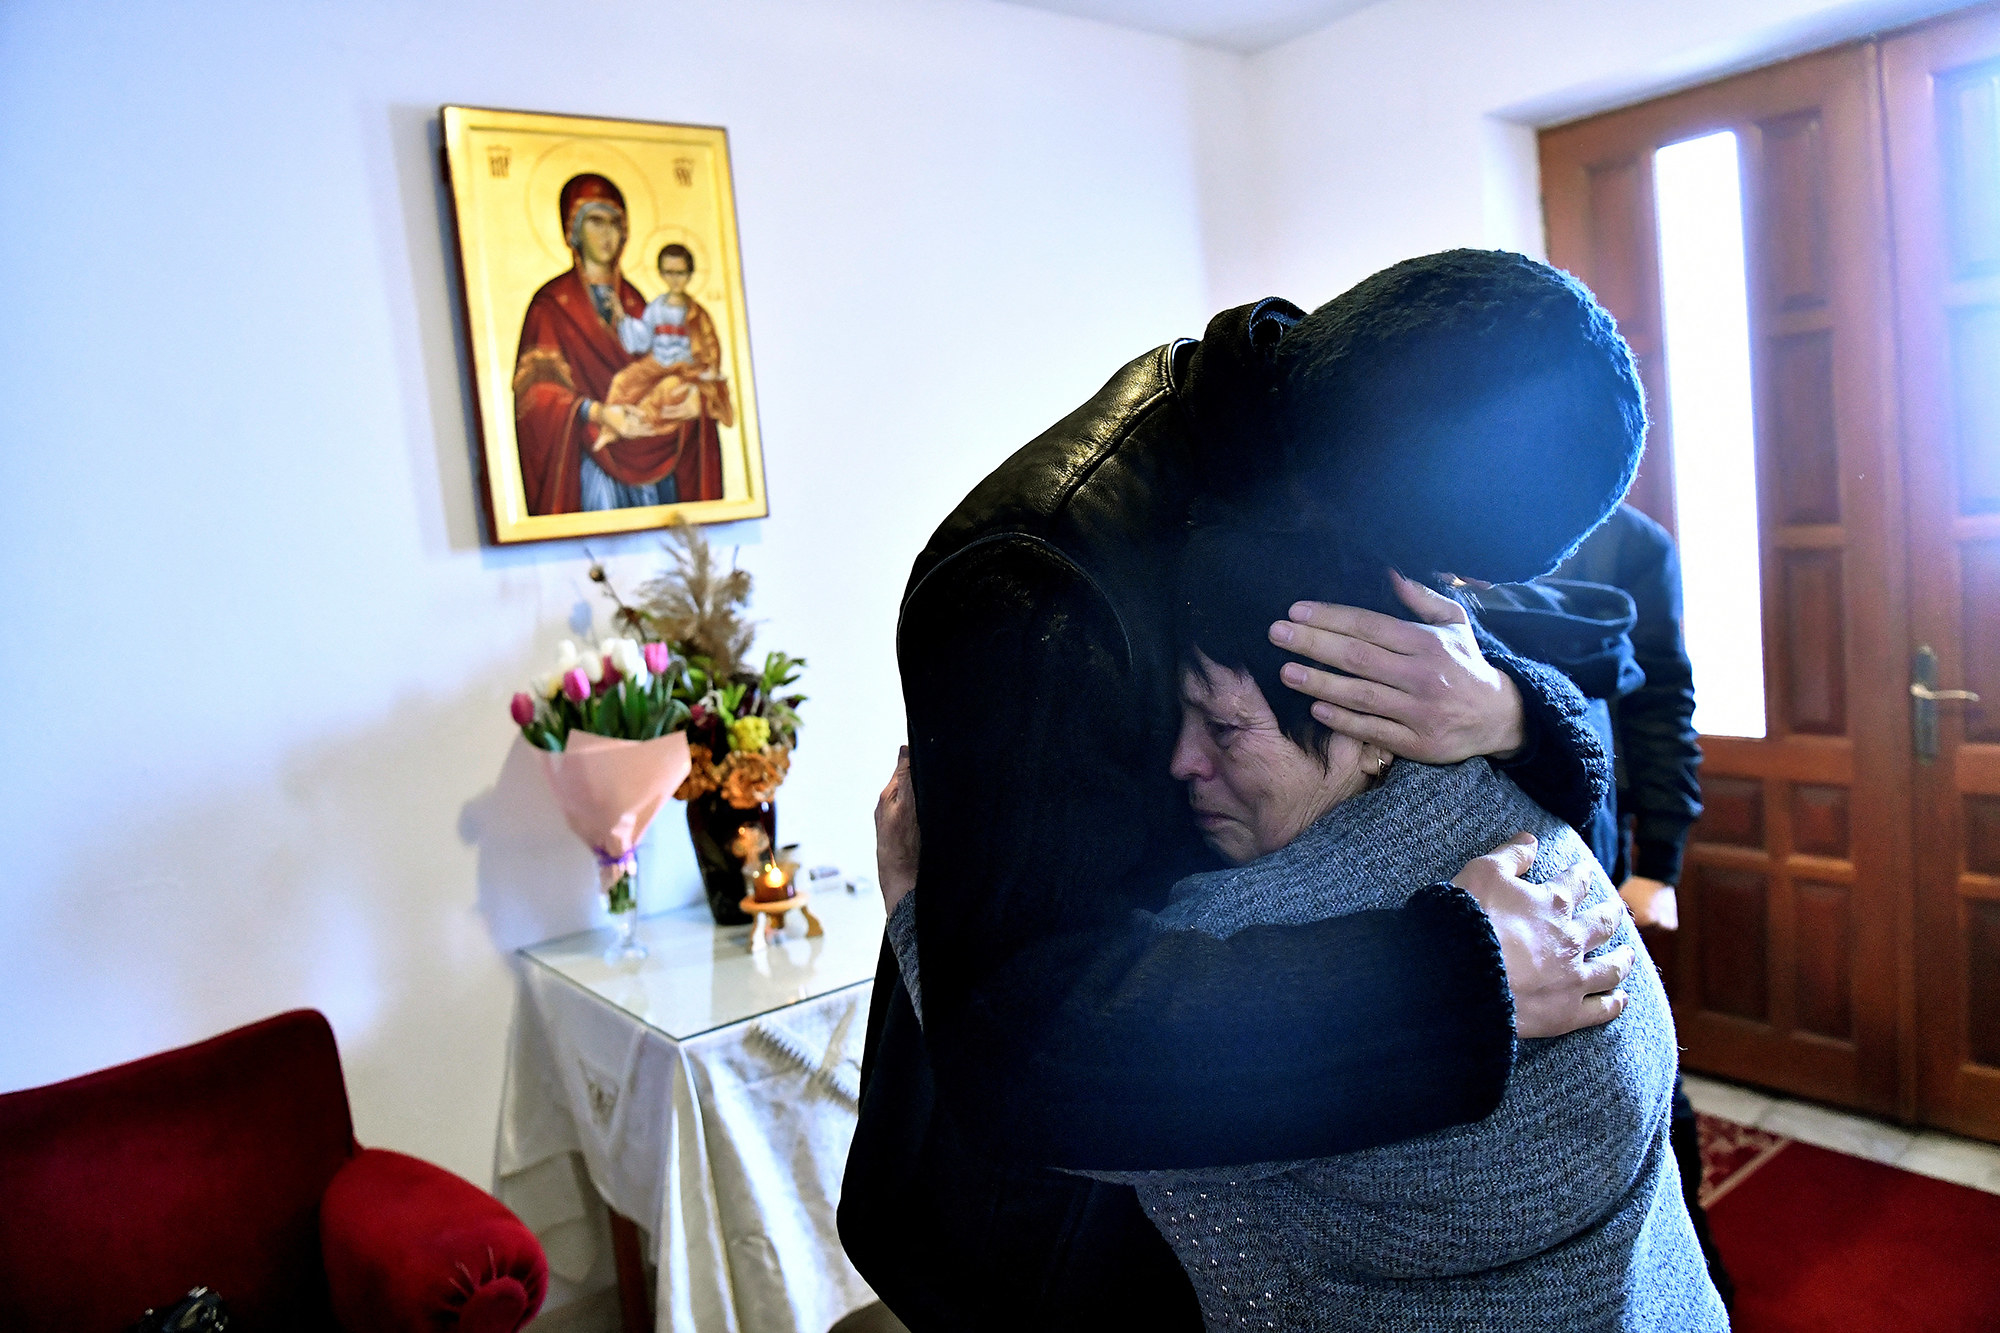 Father Gherasim Soca embraces Svetlana, a 75-year-old refugee, as she cries in a room with flowers on a table and a painting of an Orthodox saint above it